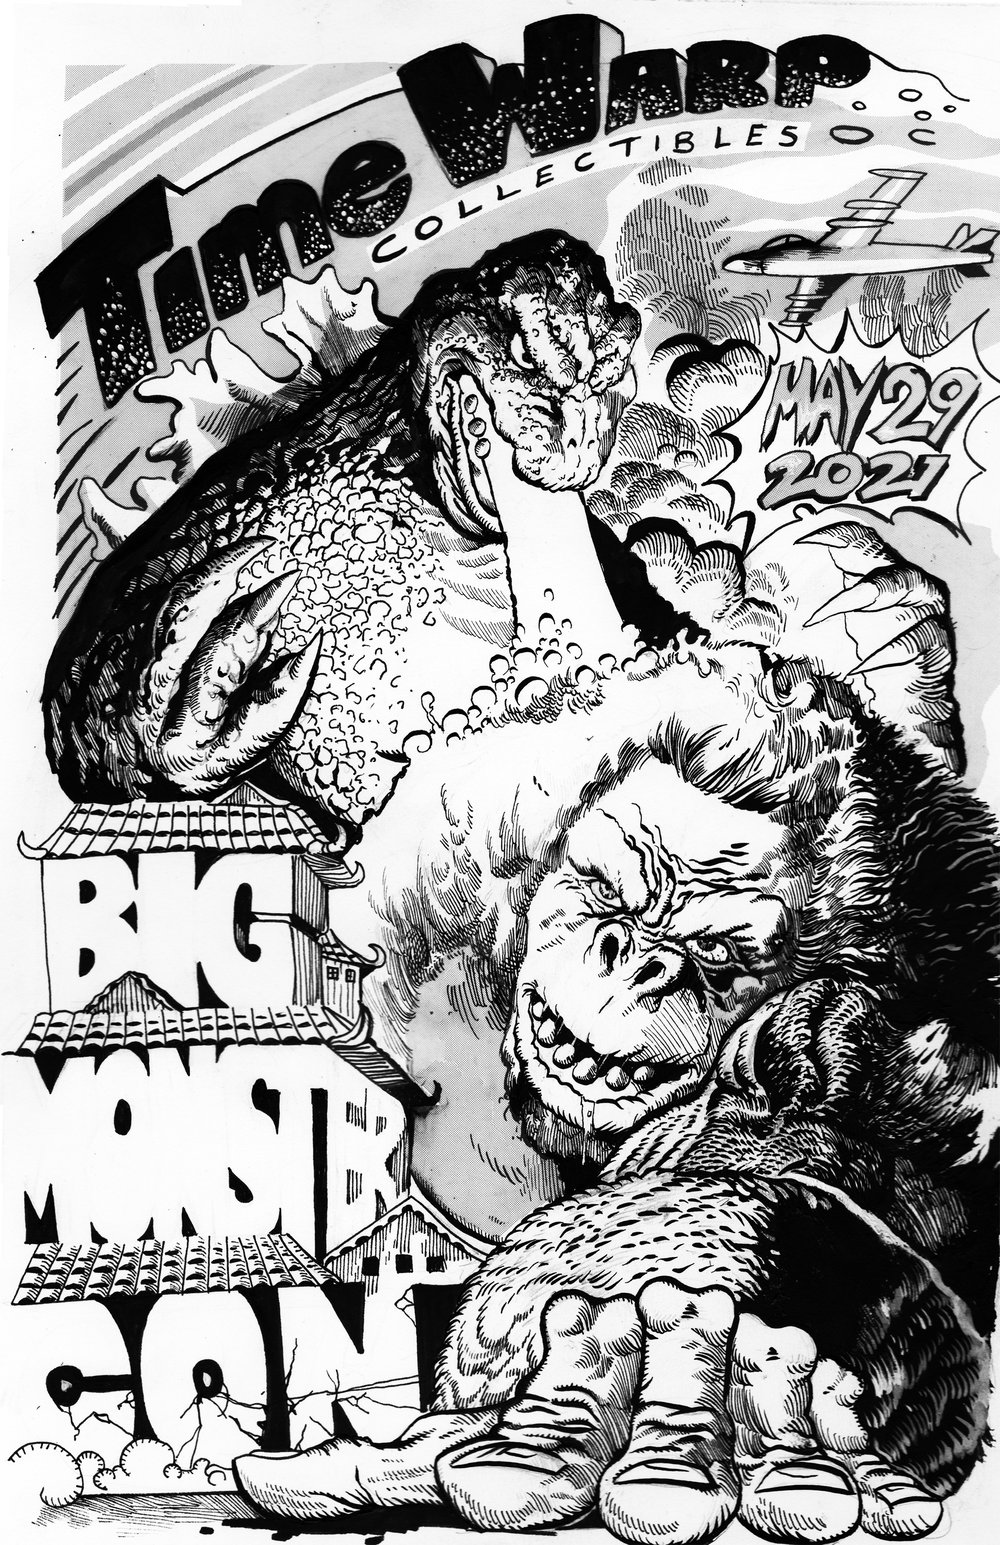 2021 Big Monster Con Limited Edition Hand Numbered Print by Kelly Forbes